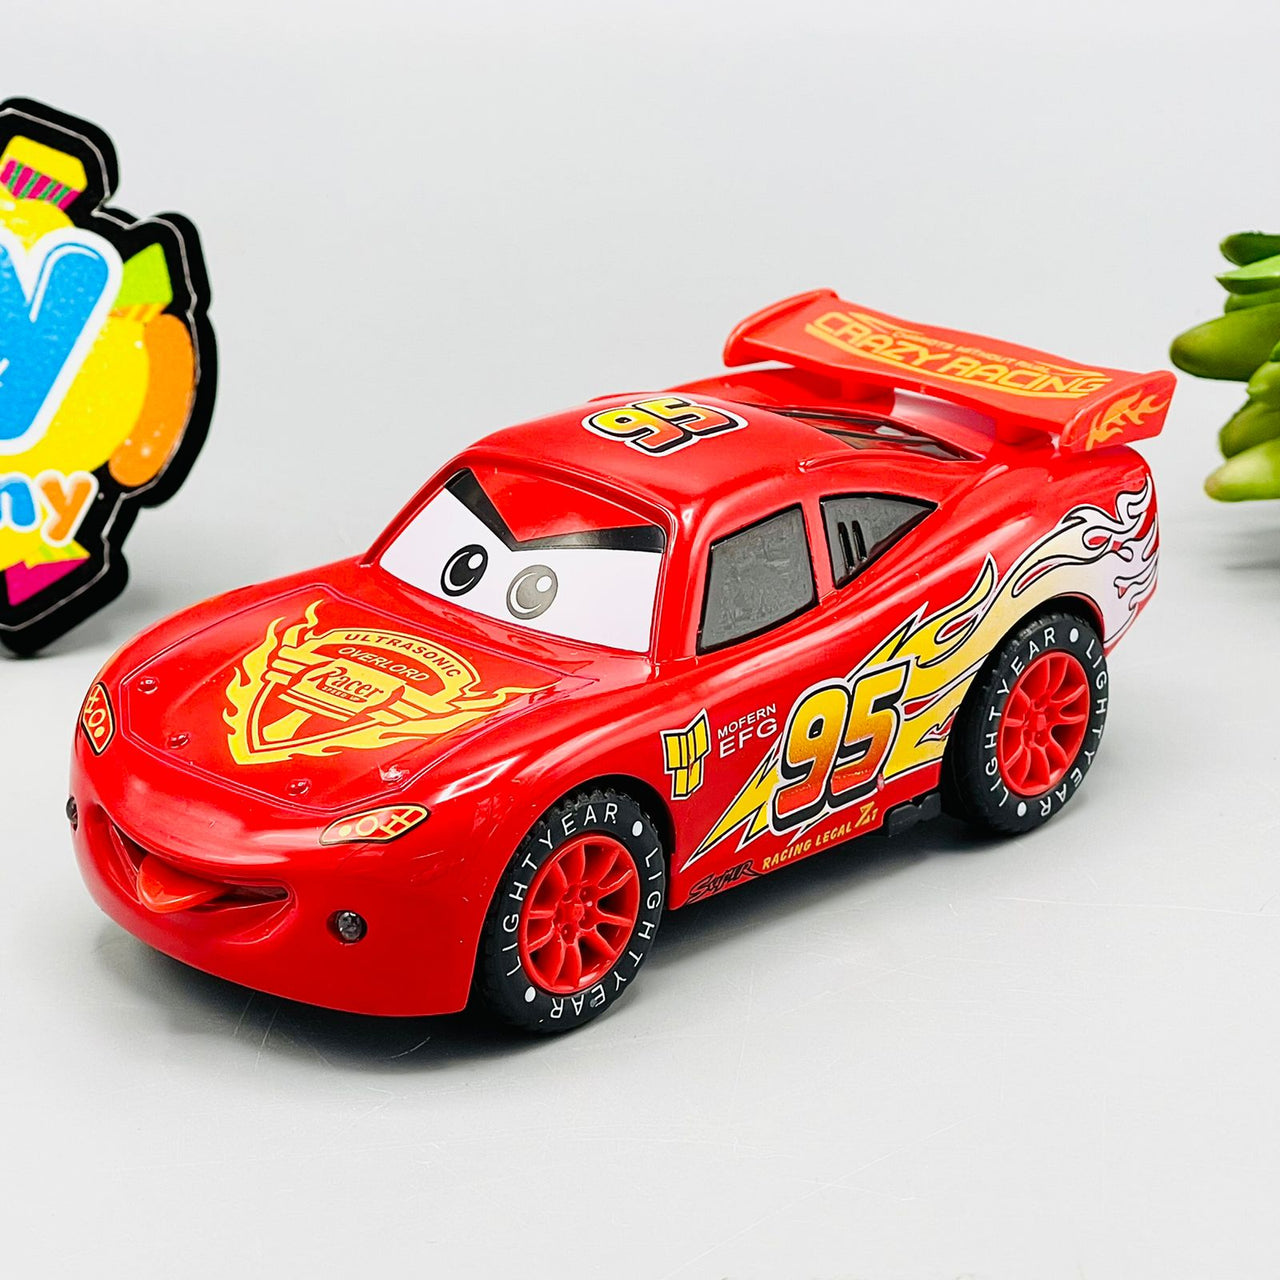 1:32 Diecast McQueen Car with Lights and Sound